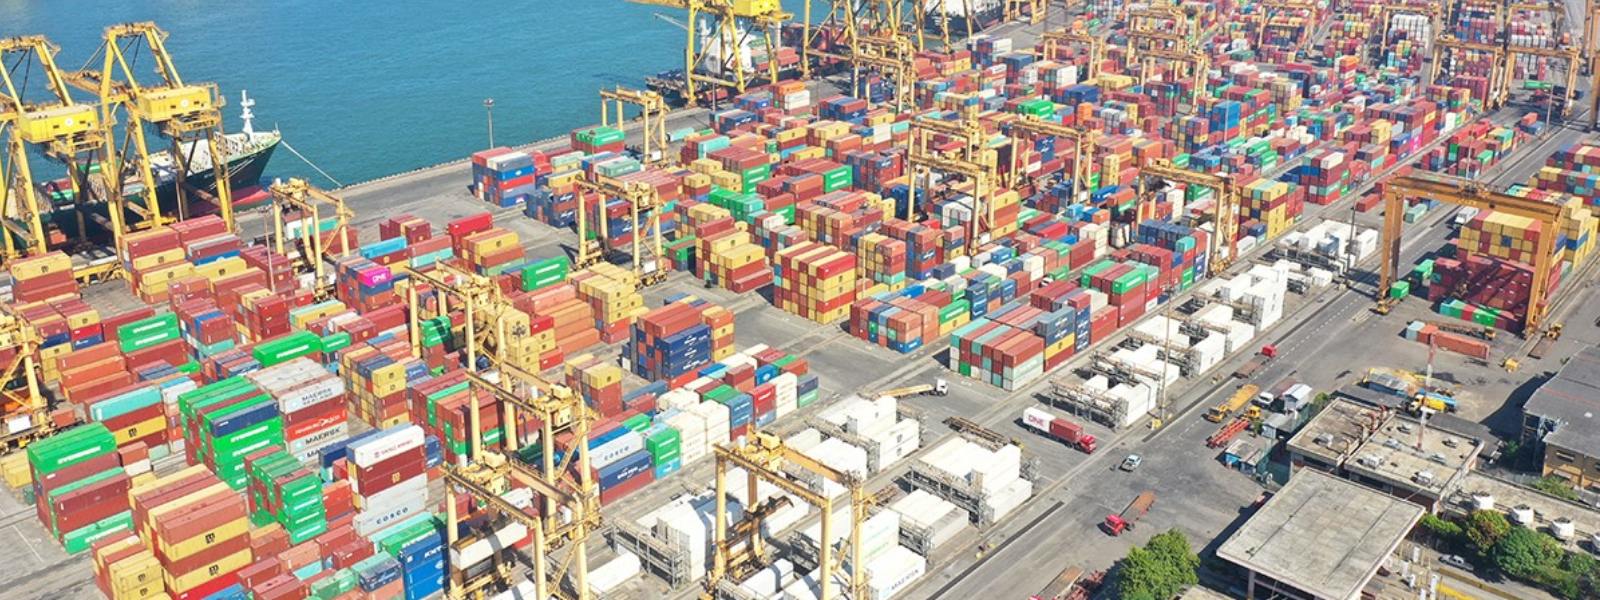 Operations & services at SLPA Terminals returning to normalcy